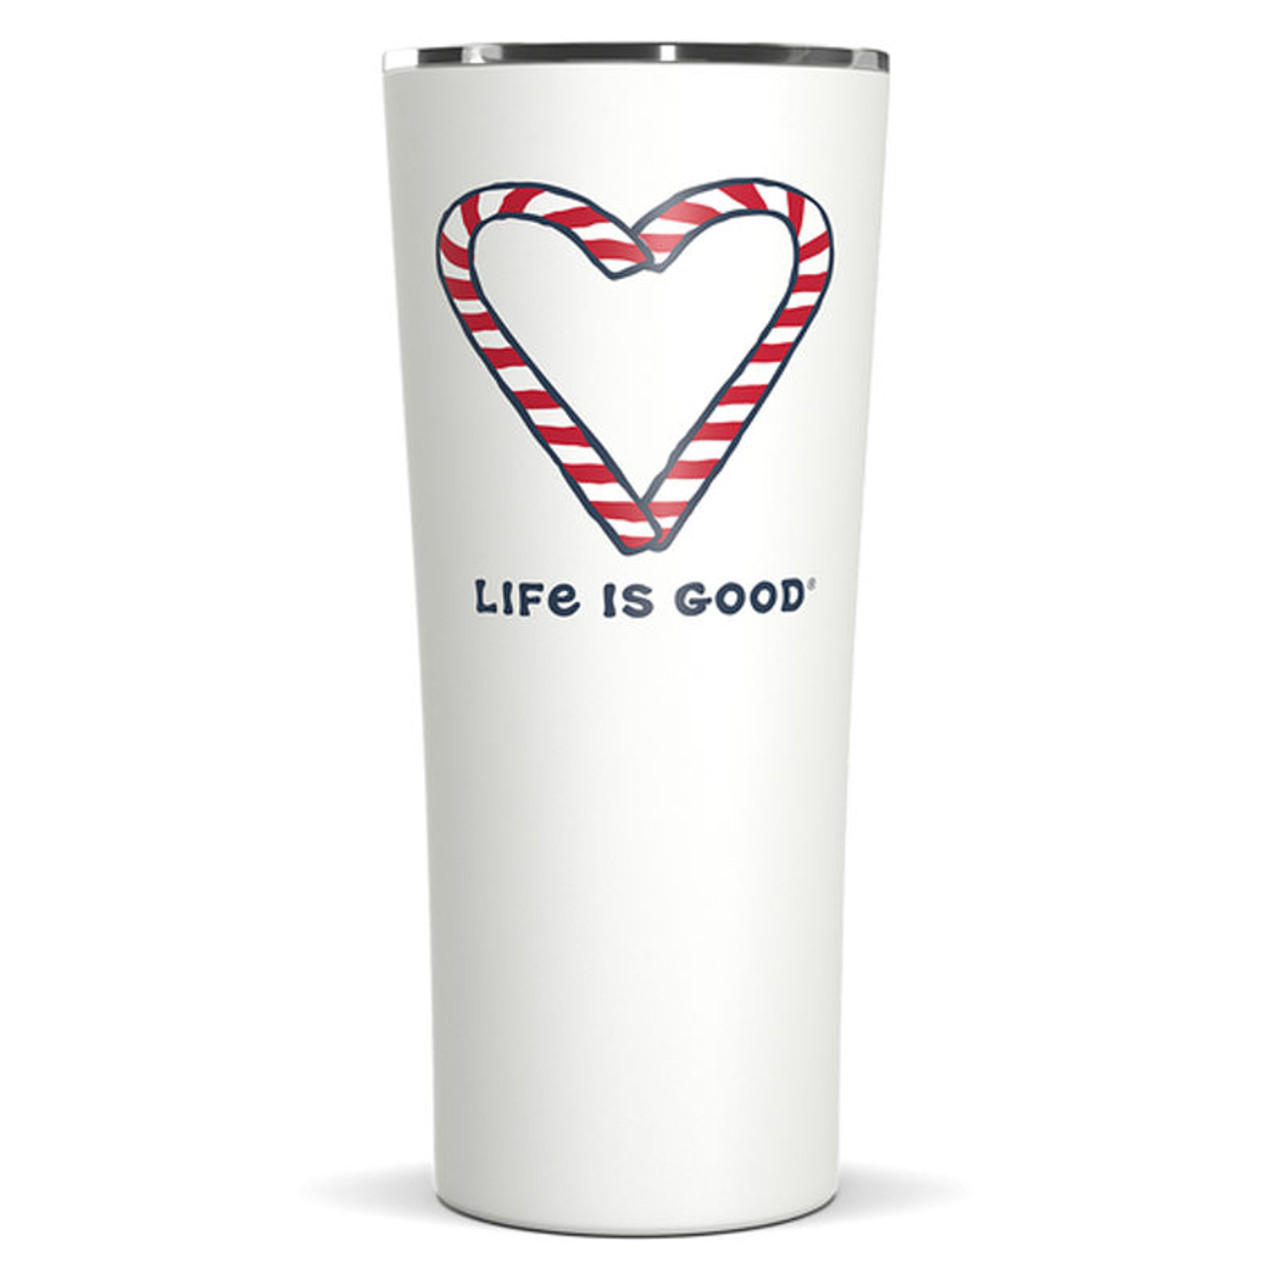 https://cdn11.bigcommerce.com/s-pqt7n8/images/stencil/1280x1280/products/11797/30876/life-is-good-stainless-tumbler-22oz-candy-cane-heart1__85936.1668537540.jpg?c=2